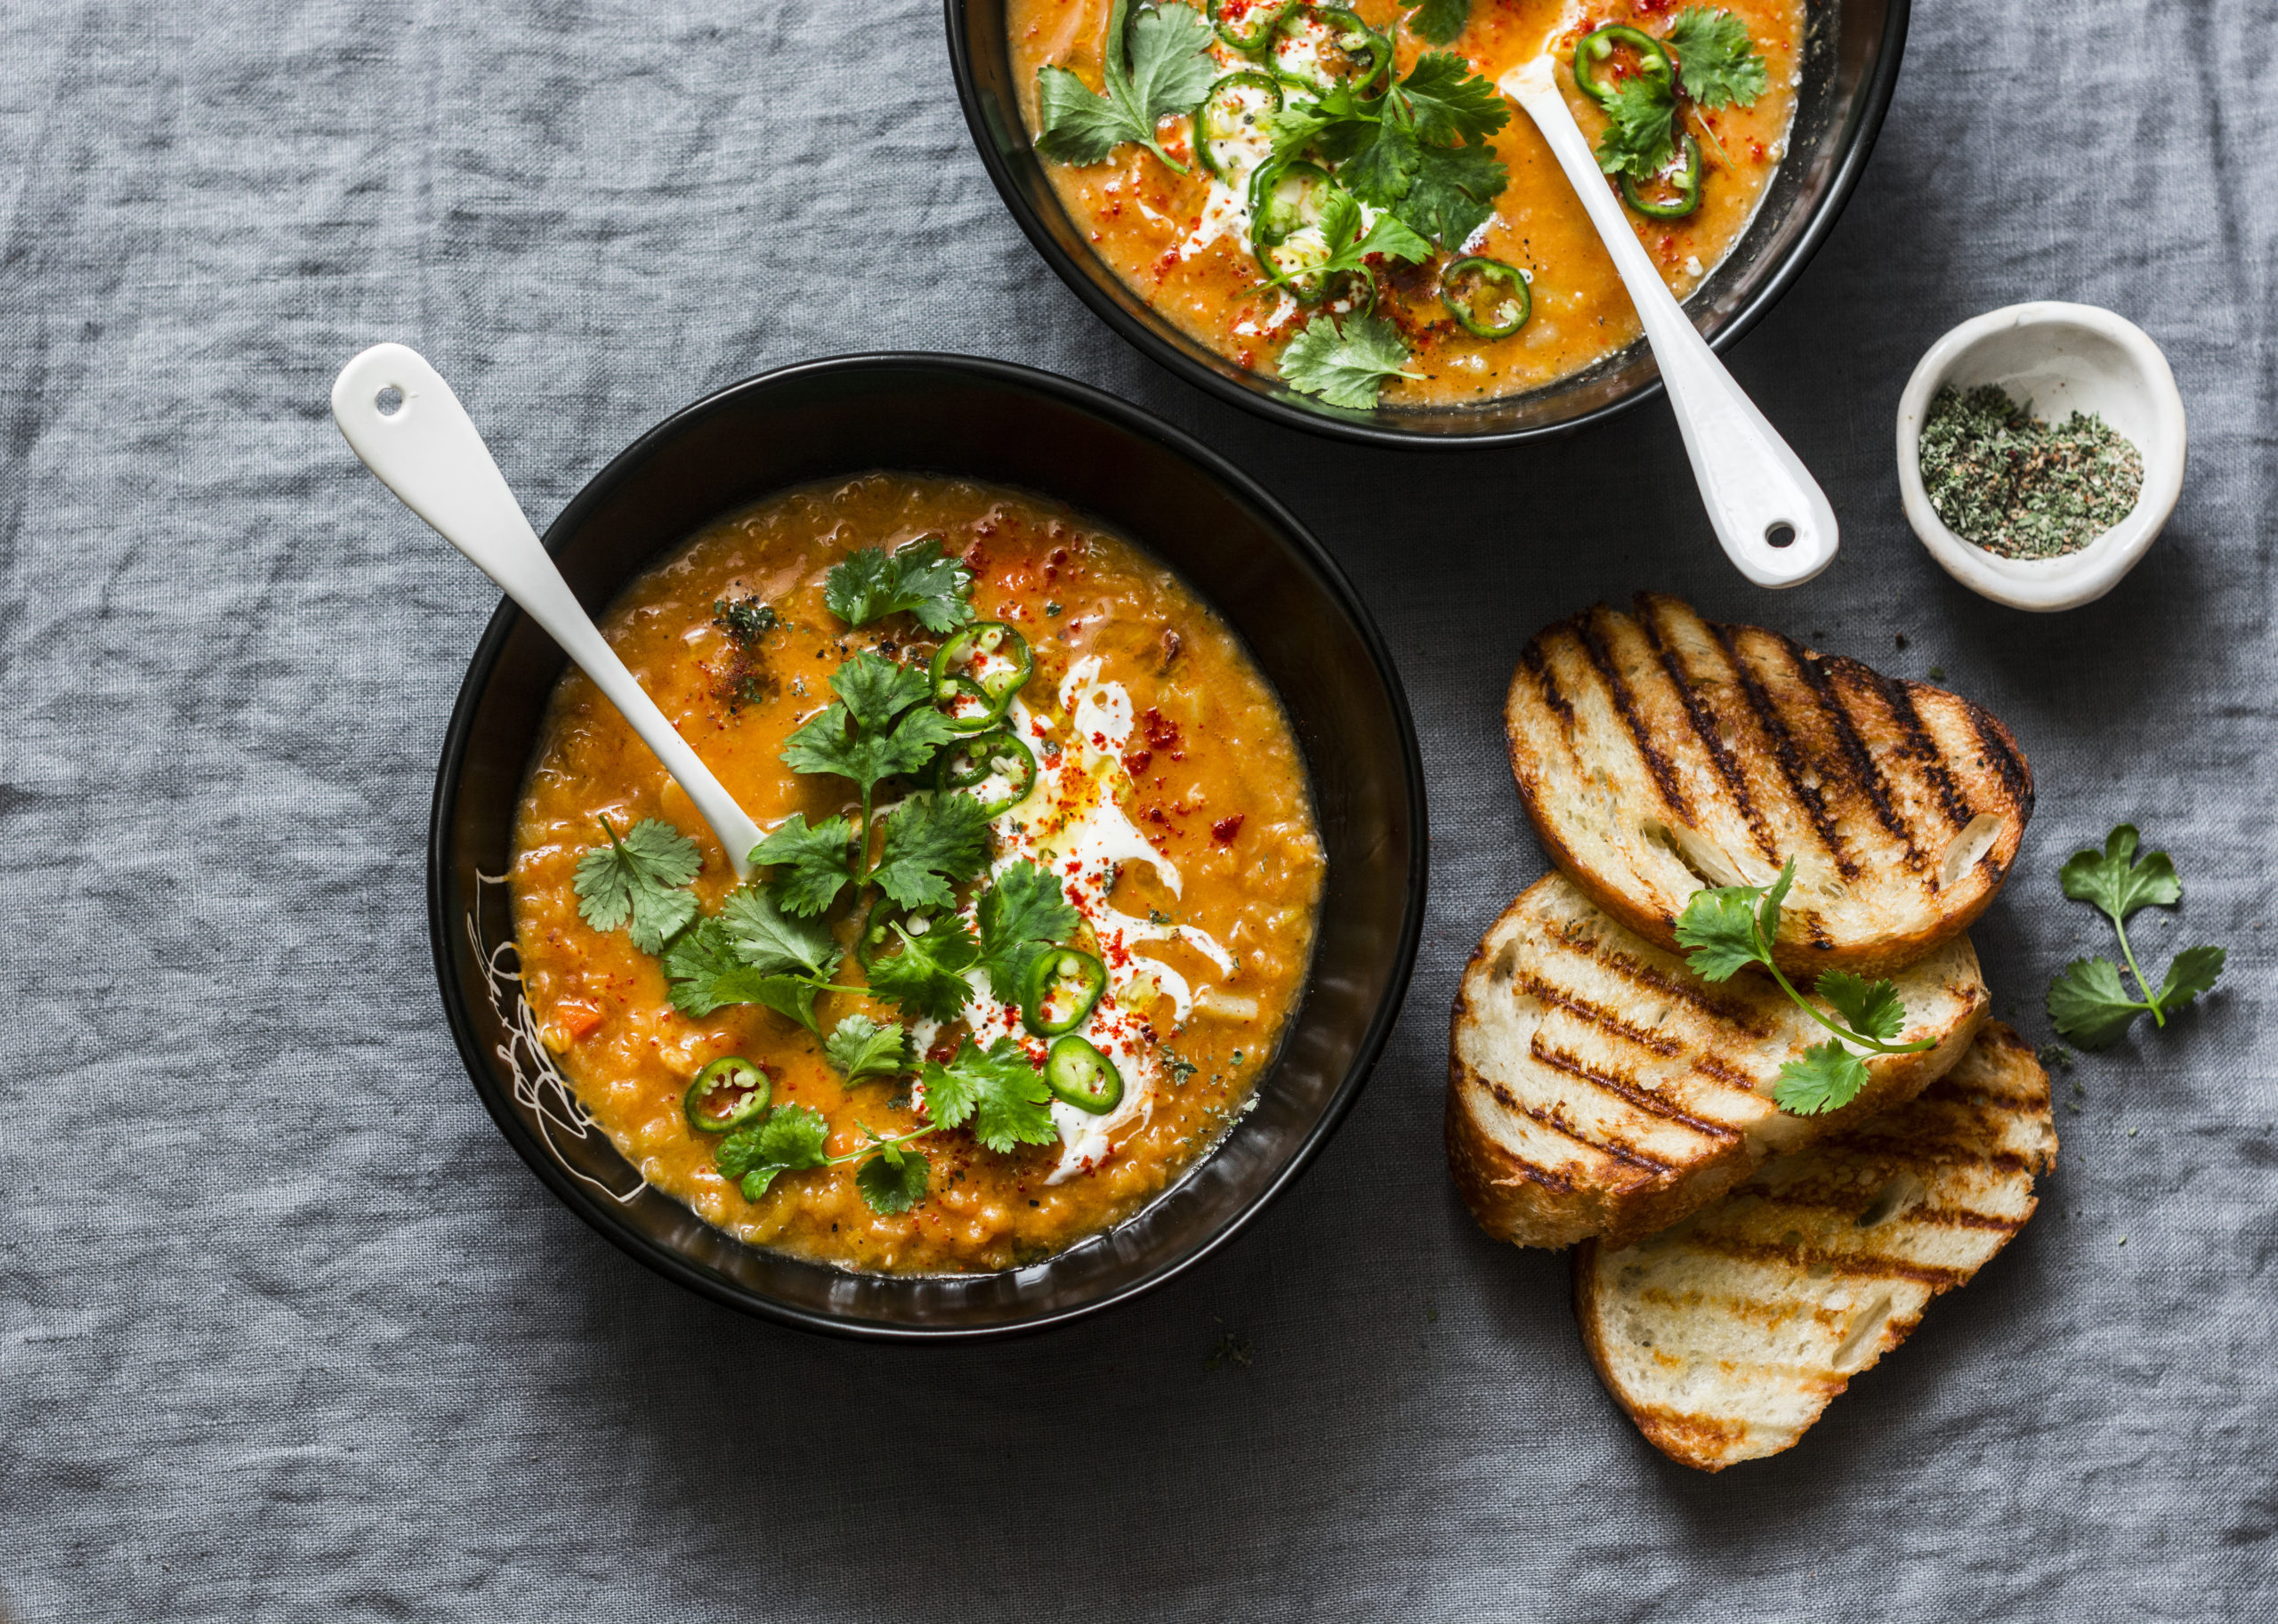 Curried red lentil tomato and coconut soup - delicious vegetarian food